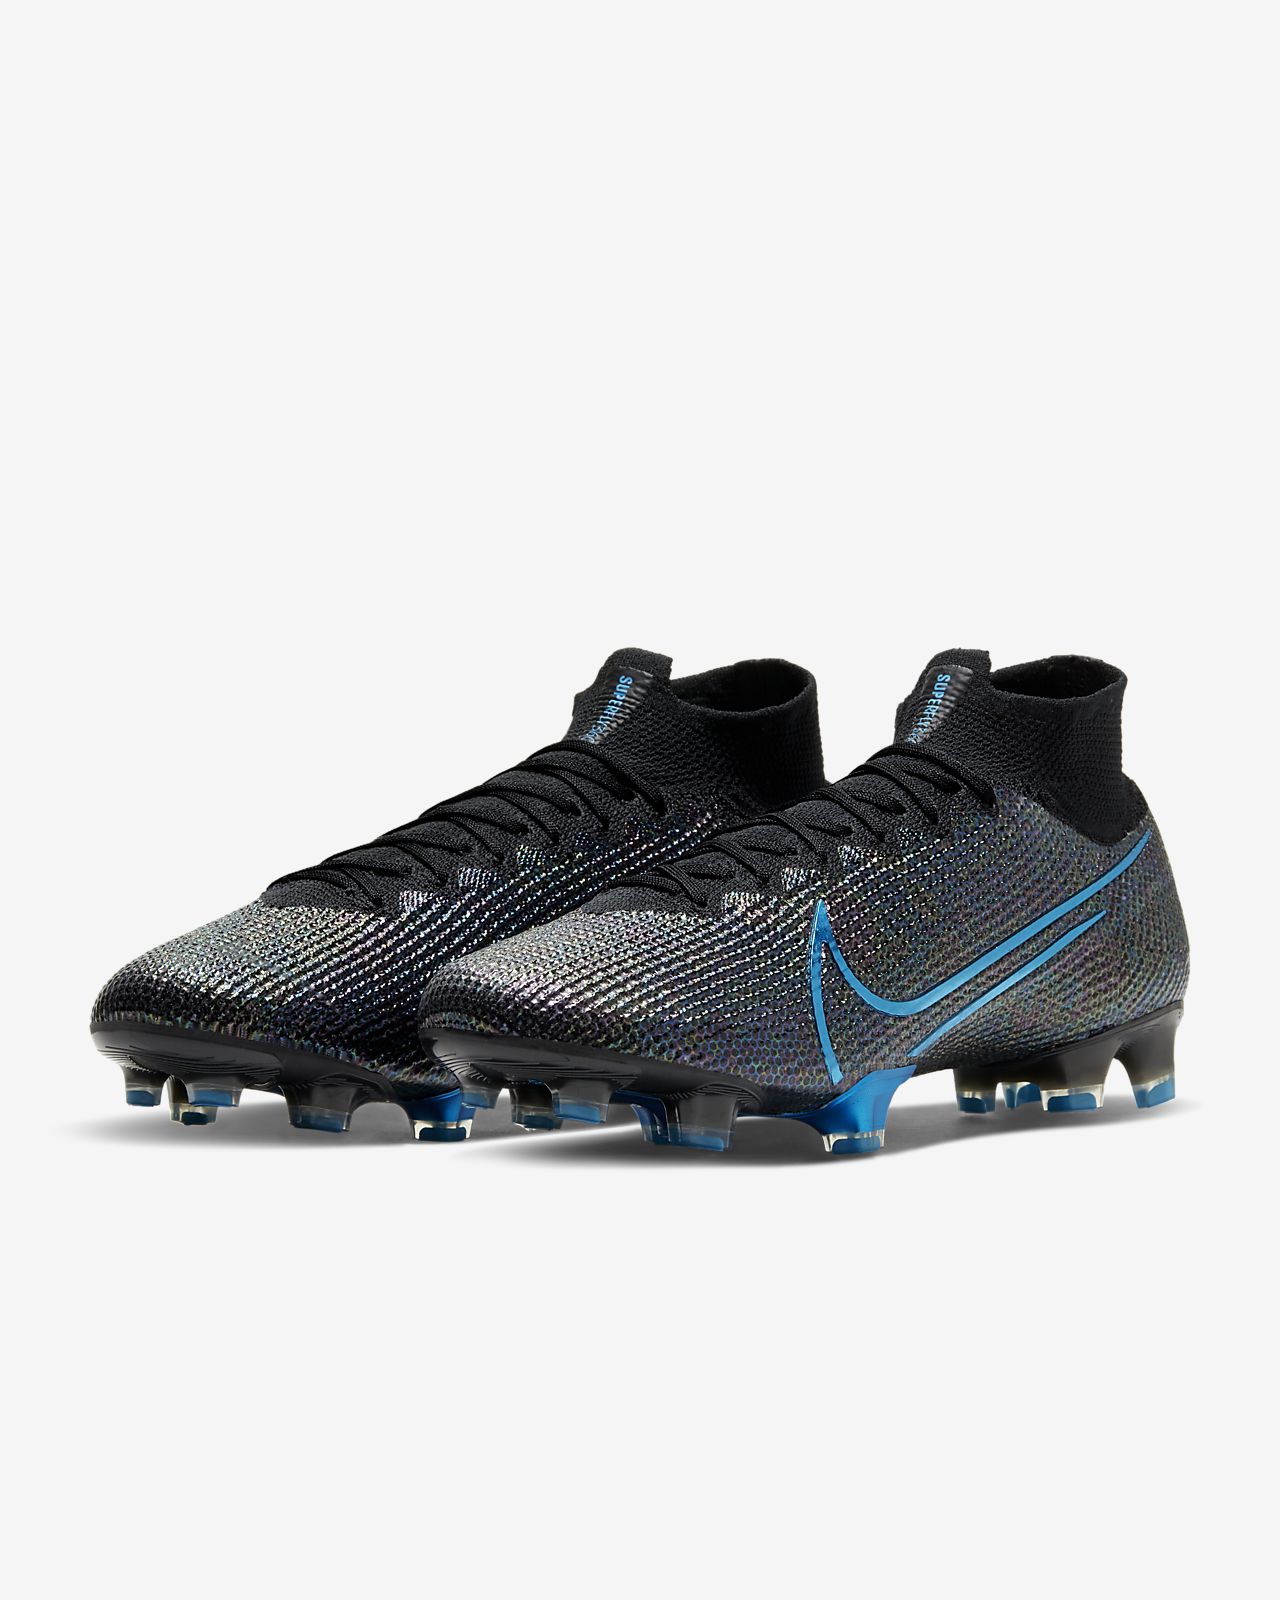 Nike Mercurial Superfly 7 Pro AG PRO Artificial Grass Football